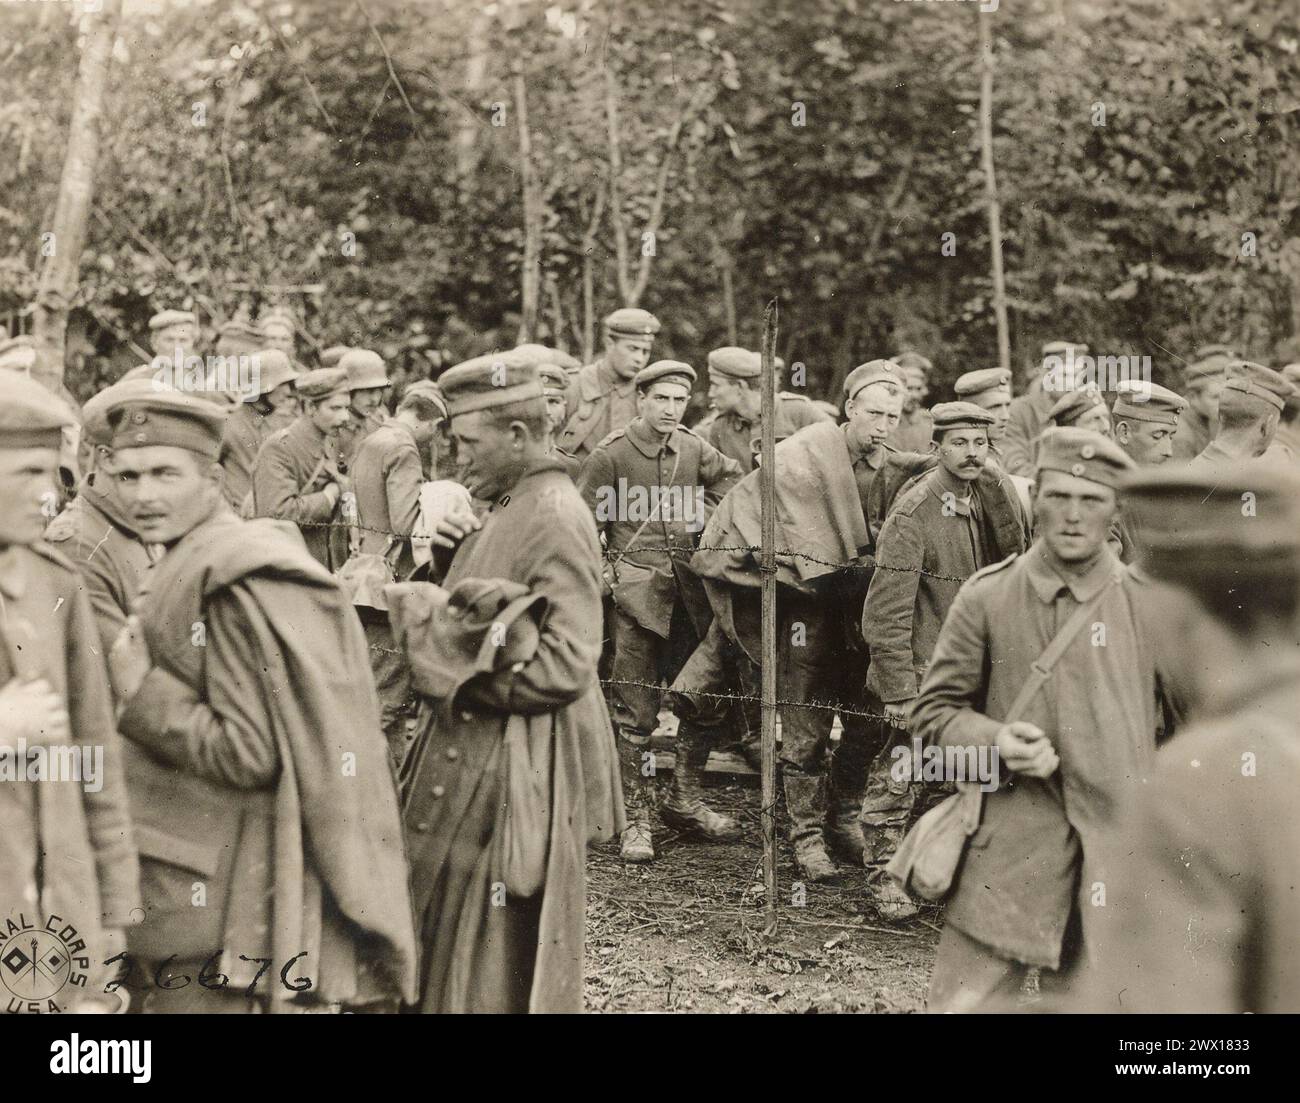 A group of German prisoners of war captured by the 125th infantry on October 9th, 1918. About 1000 were captured this day. Location: Argonne Woods near Montfaucon, Meuse, France. Stock Photo